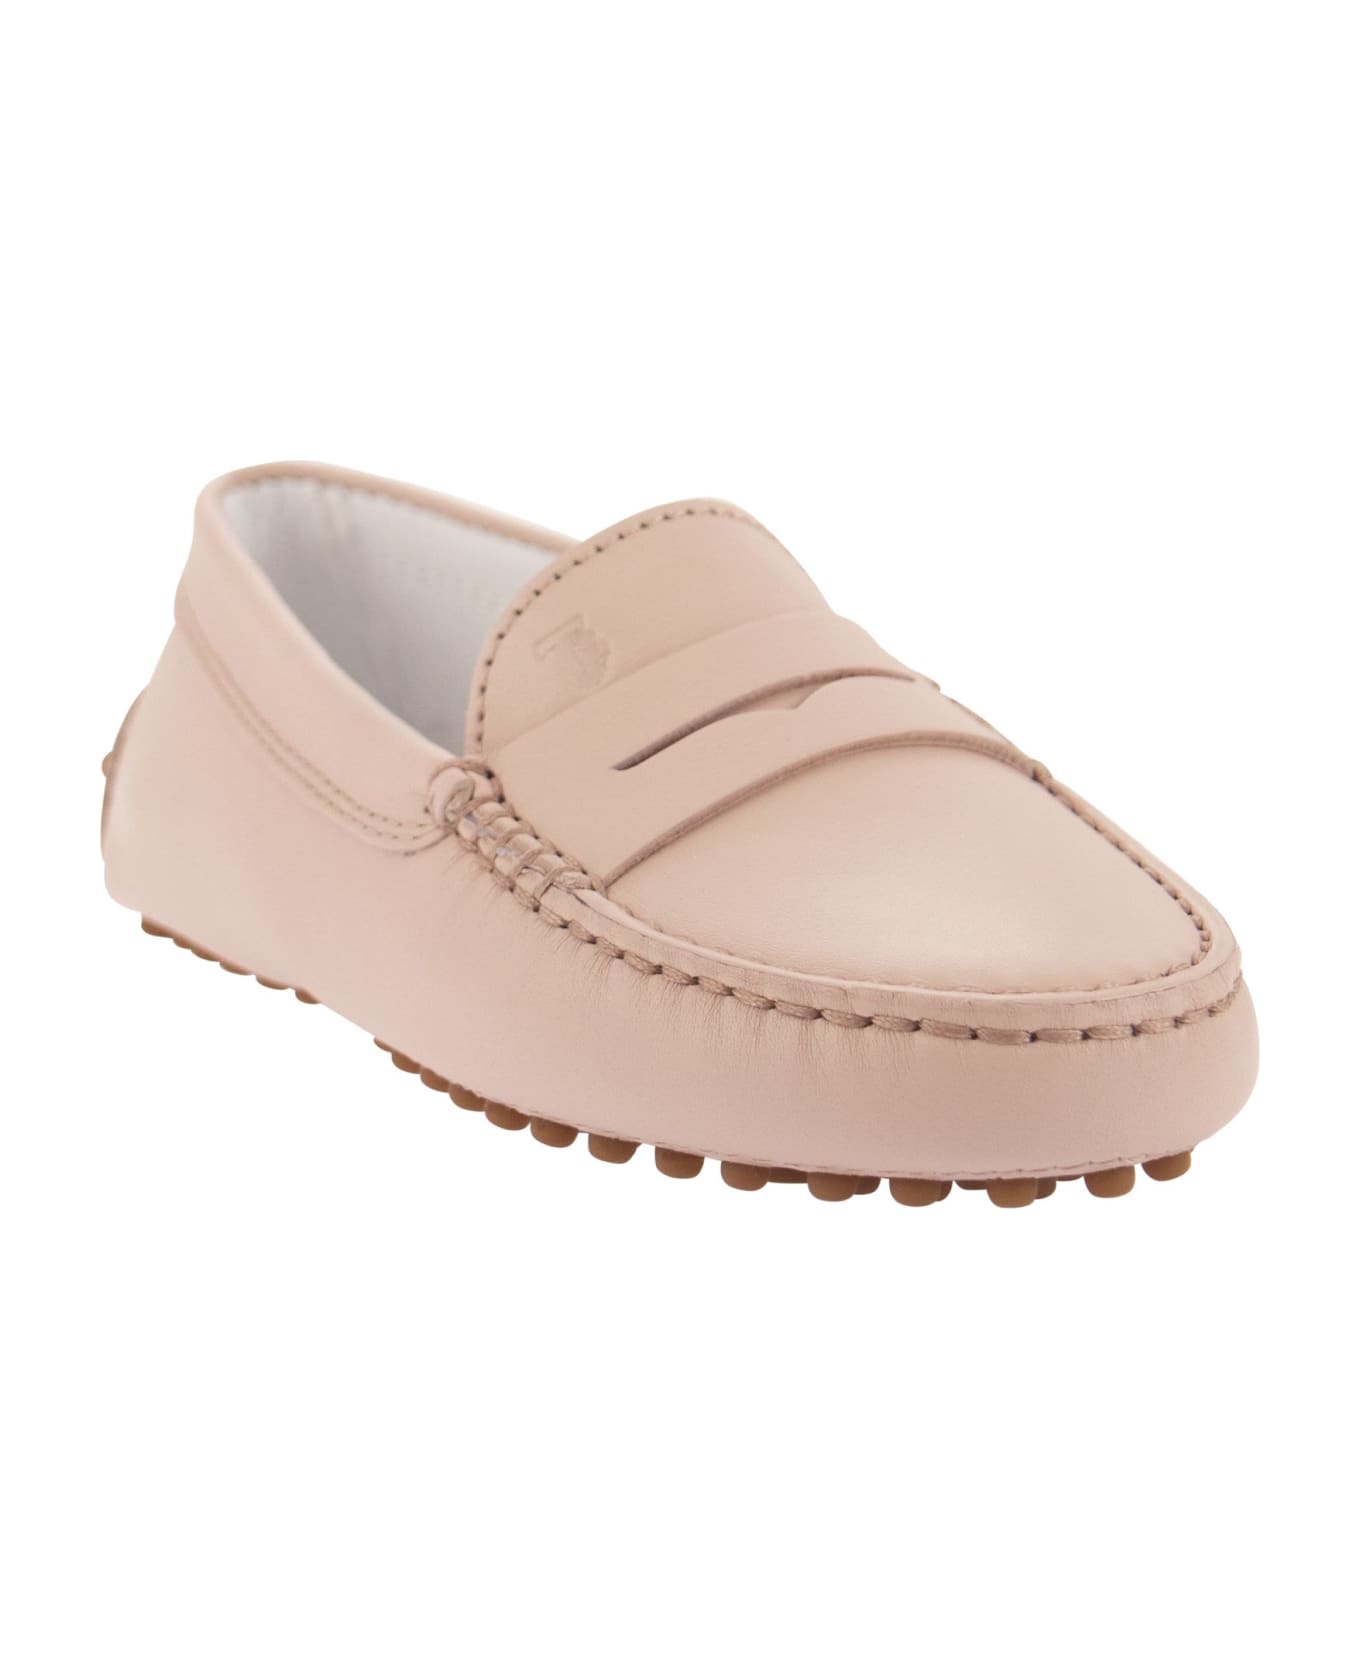 Tod's Gommino Leather Loafer - Pink シューズ